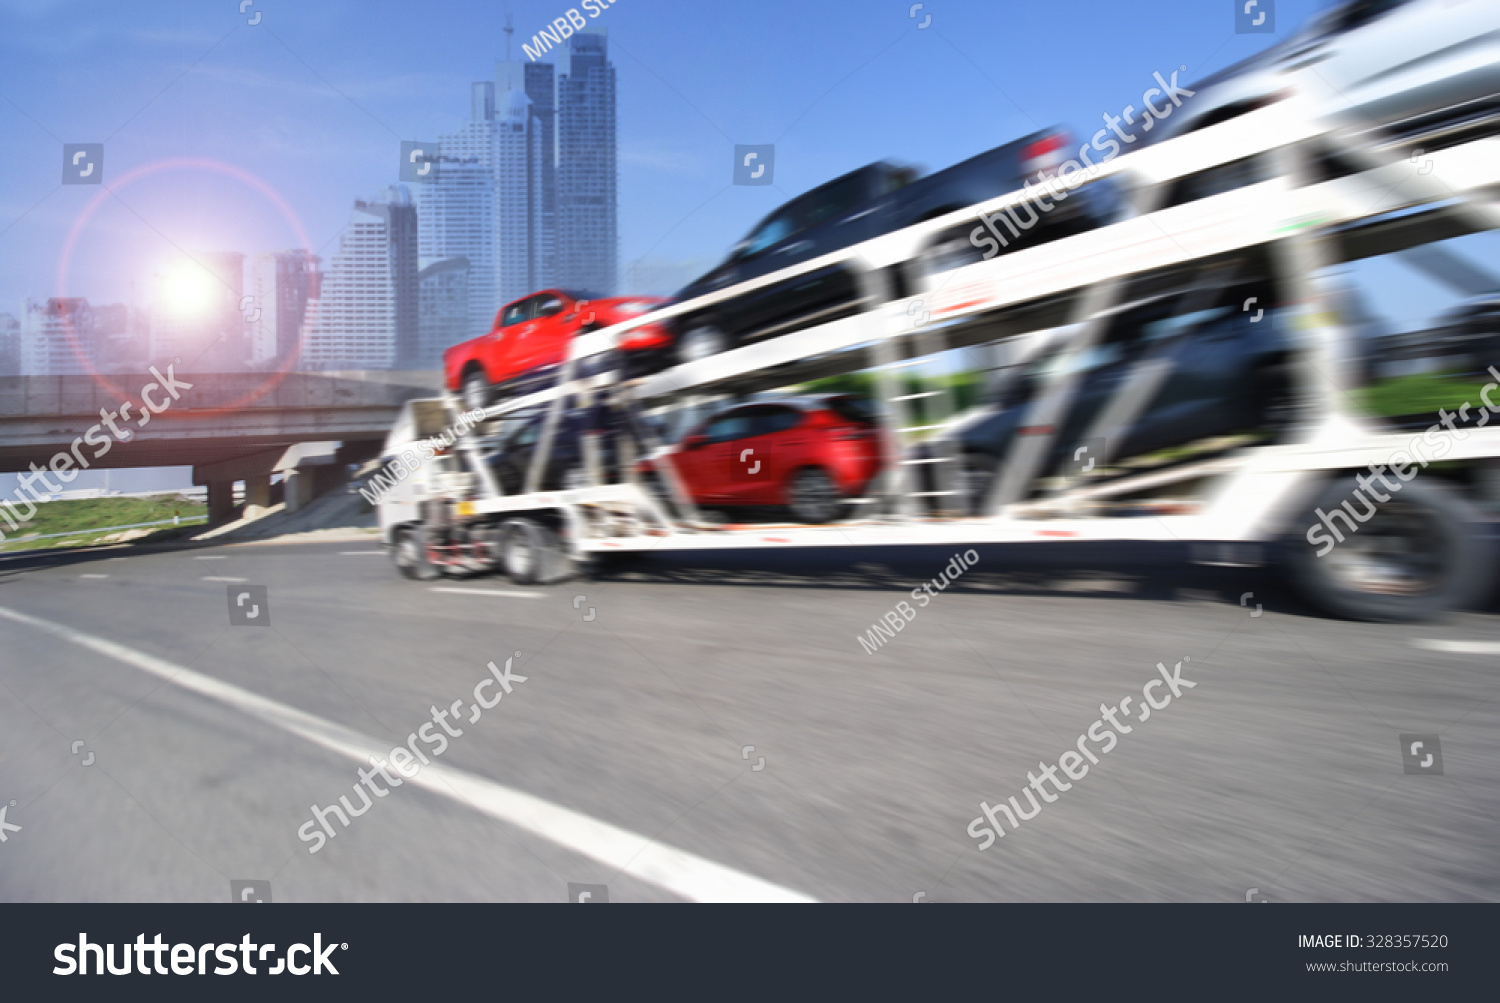 The trailer transports cars on highway with big city background  #328357520